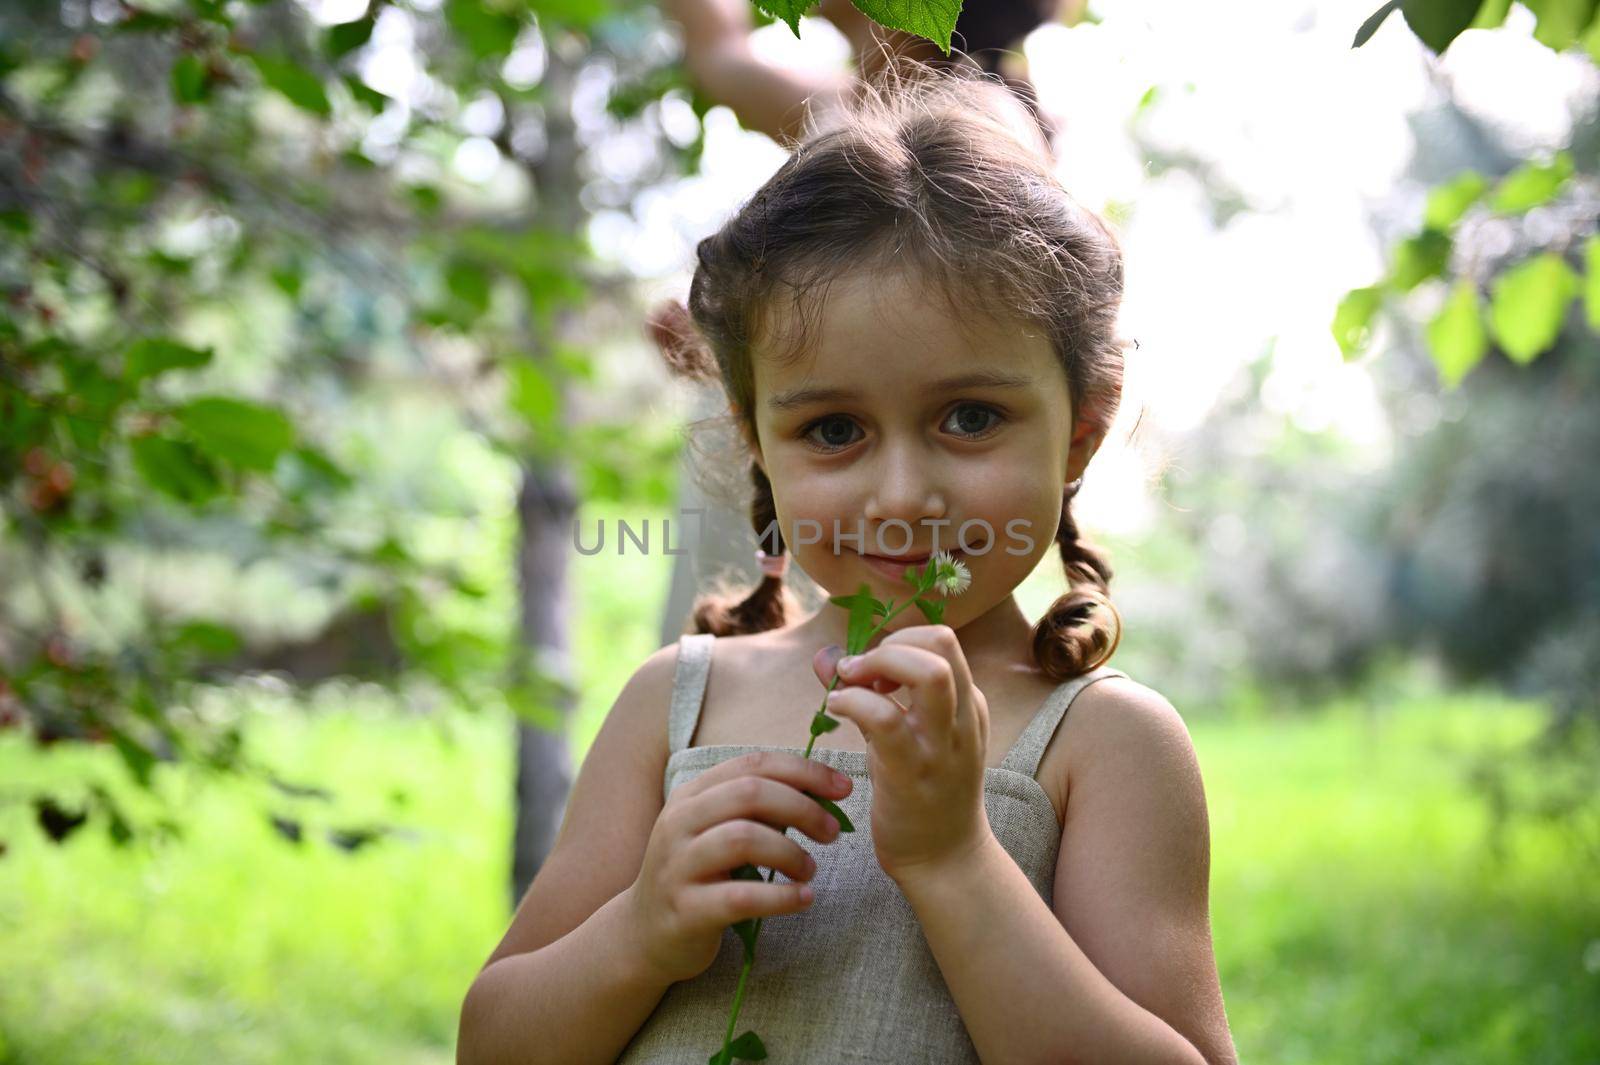 A cute girl shyly poses in front of the camera with a wildflower in her hands near her face against the background of her mother picking cherries in the garden on a summer day in the rays of sunset